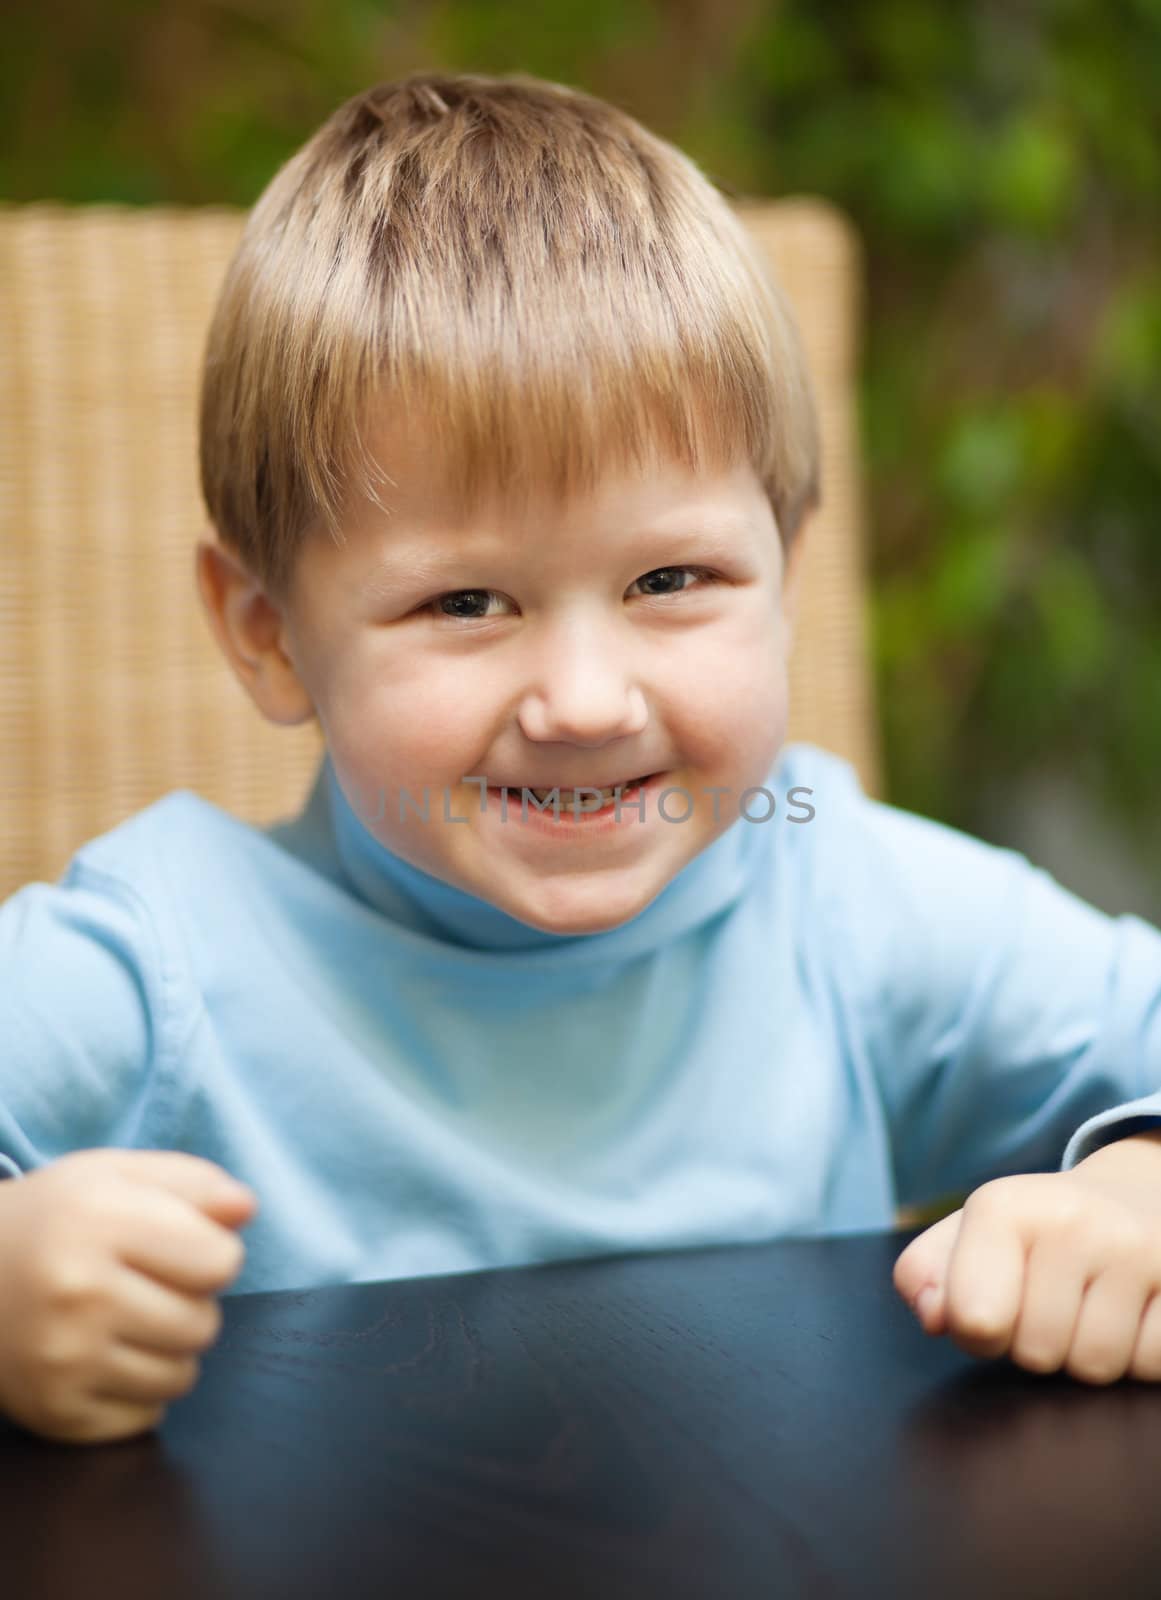 Portrait of a blond little boy with roguish smile